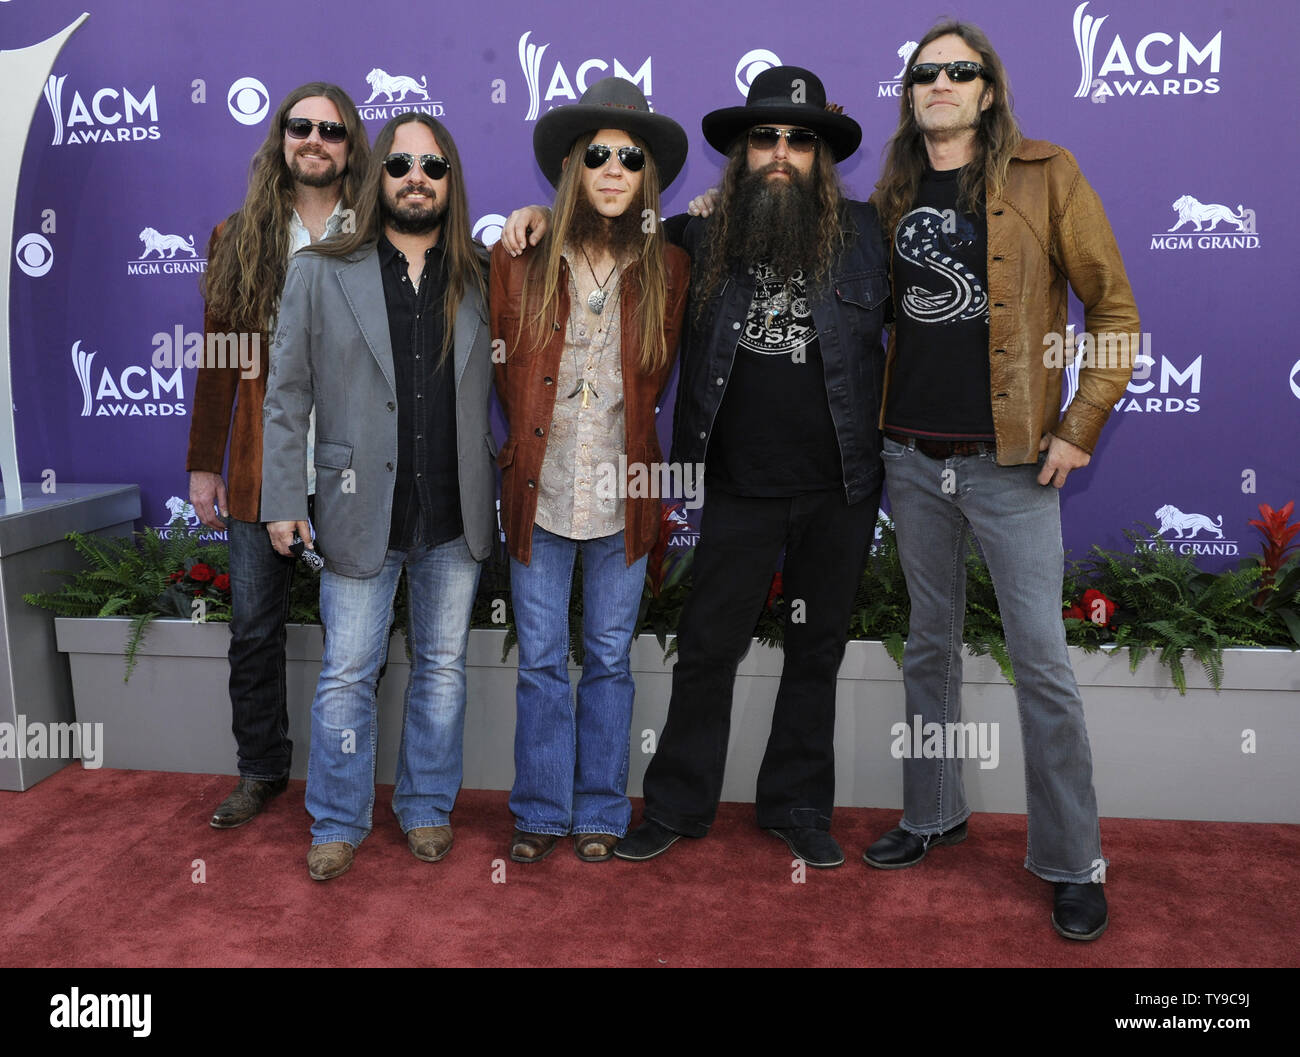 (L-R) Brandon Still, Paul Jackson, Charlie Starr, Brit Turner, and Richard Turner of music group Blackberry Smoke arrive at the 48th annual Academy of Country Music Awards at the MGM Hotel in Las Vegas, Nevada on April 7, 2013. UPI/David Becker Stock Photo